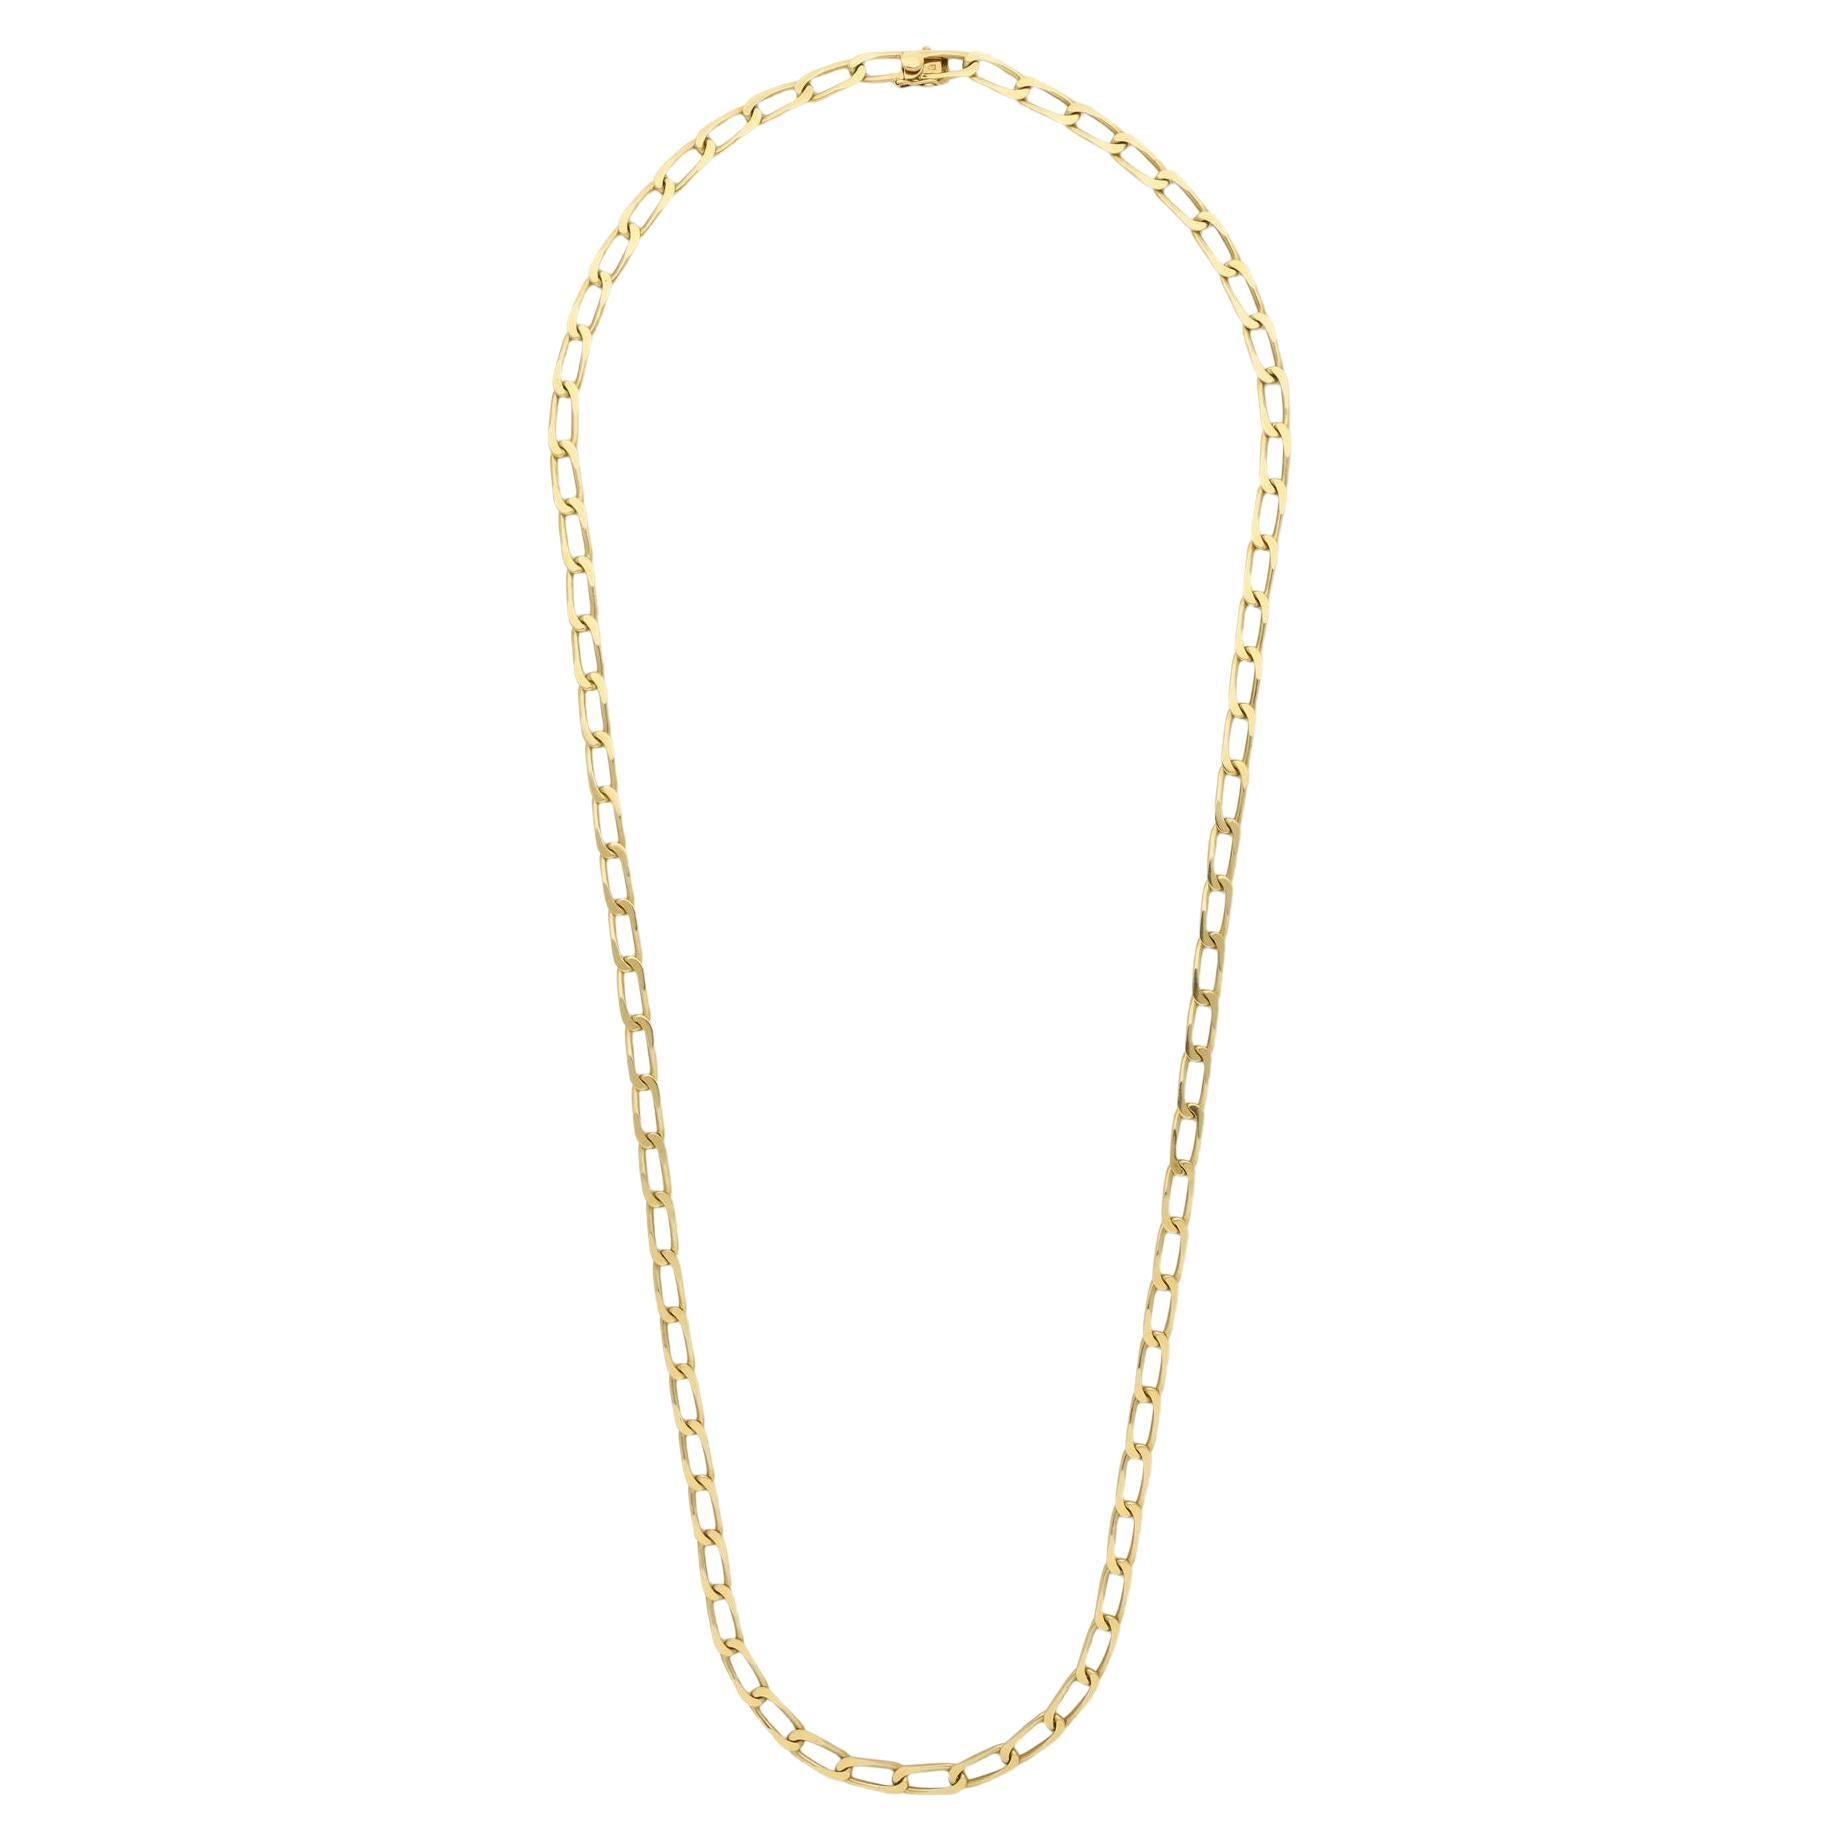 Cartier 18ct Gold 'Paperclip' Long Chain Necklace 1977 For Sale